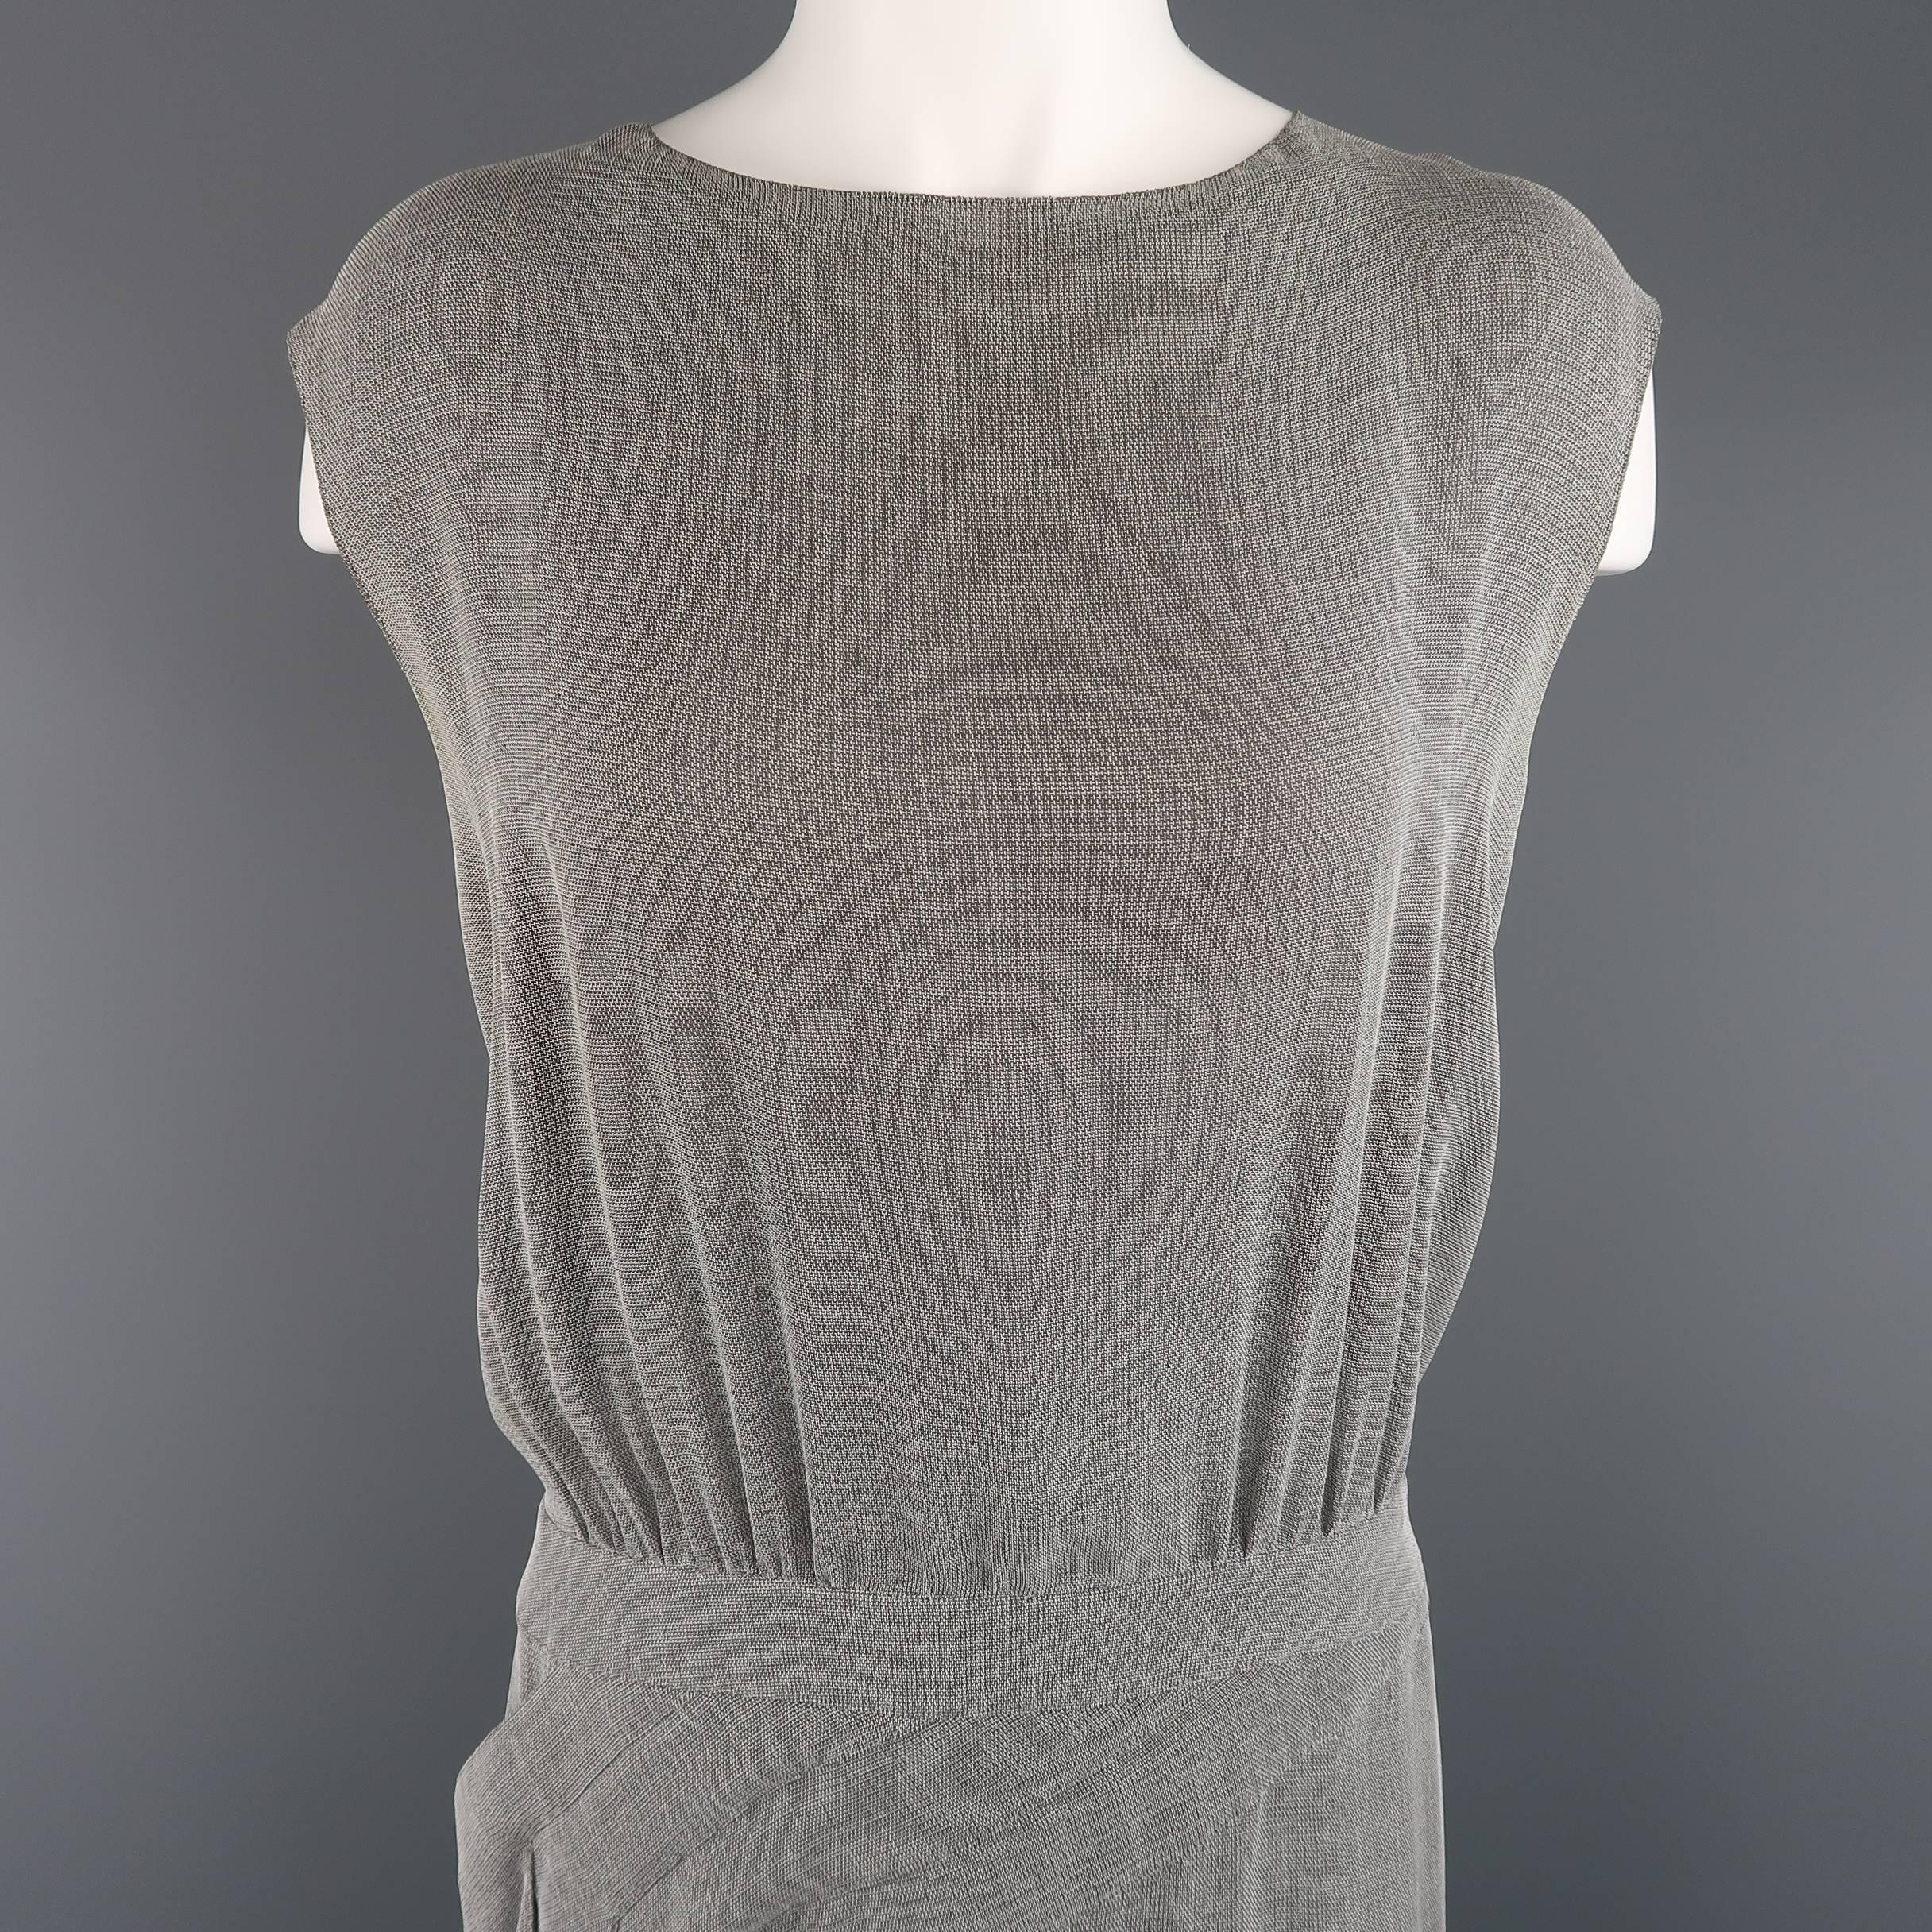 This archive CHANEL sleeveless shift dress from the Spring Summer 1999 collection comes in a light weight gray chainmail look mesh knit and features a round neckline, blousey gathered top, button up back with slit, drop waist, and A line skirt with